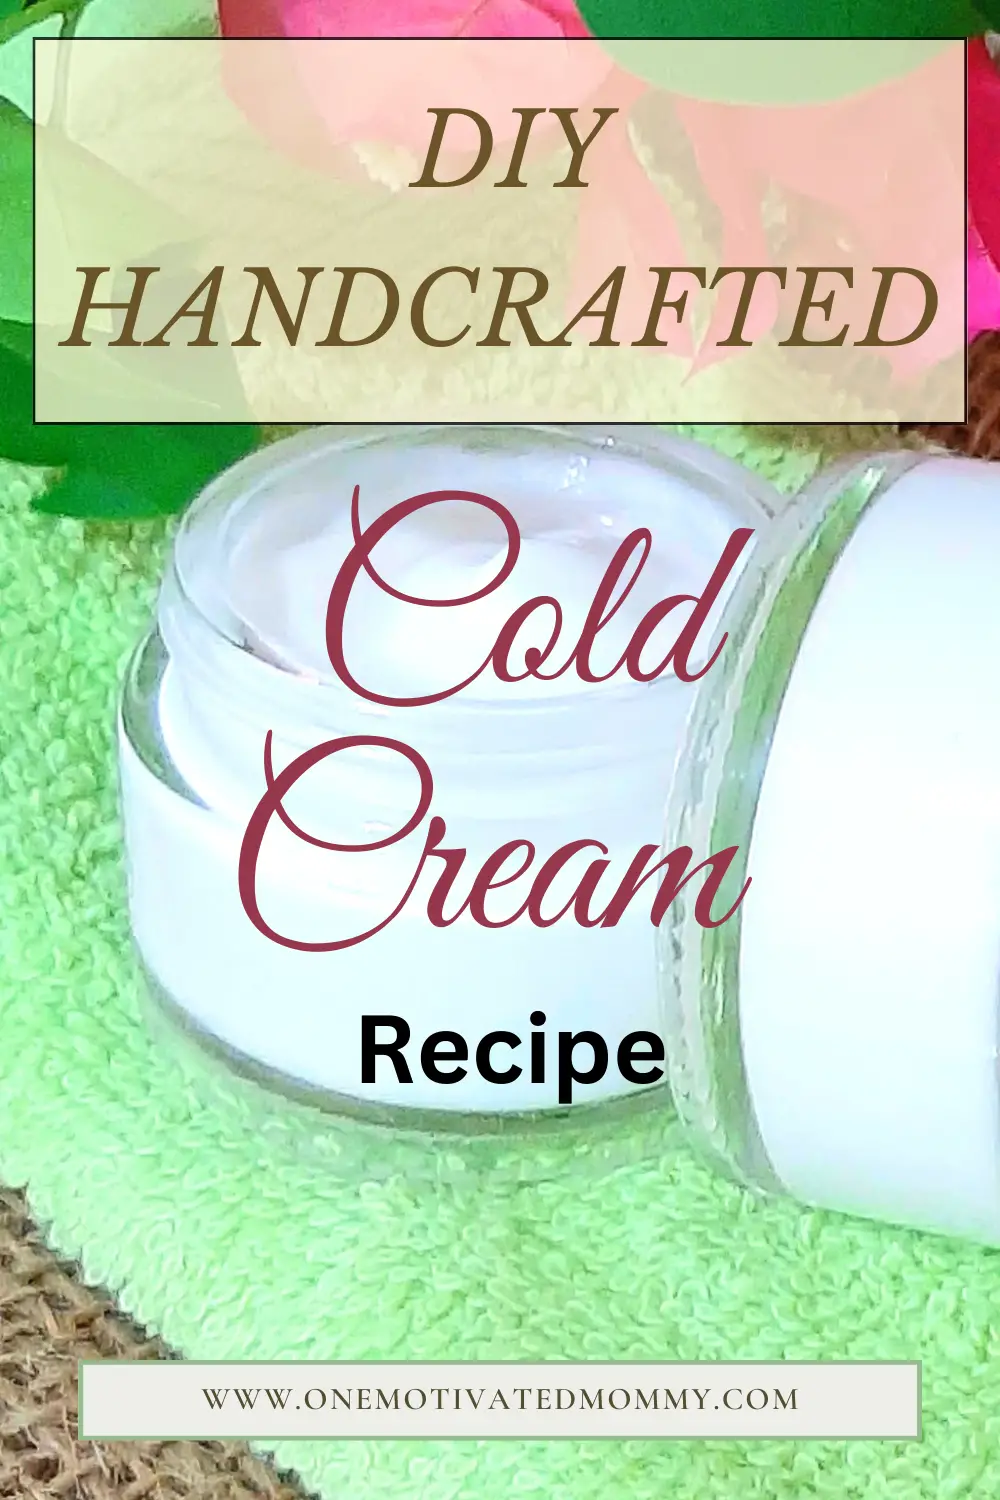 Handcrafted Cold Cream